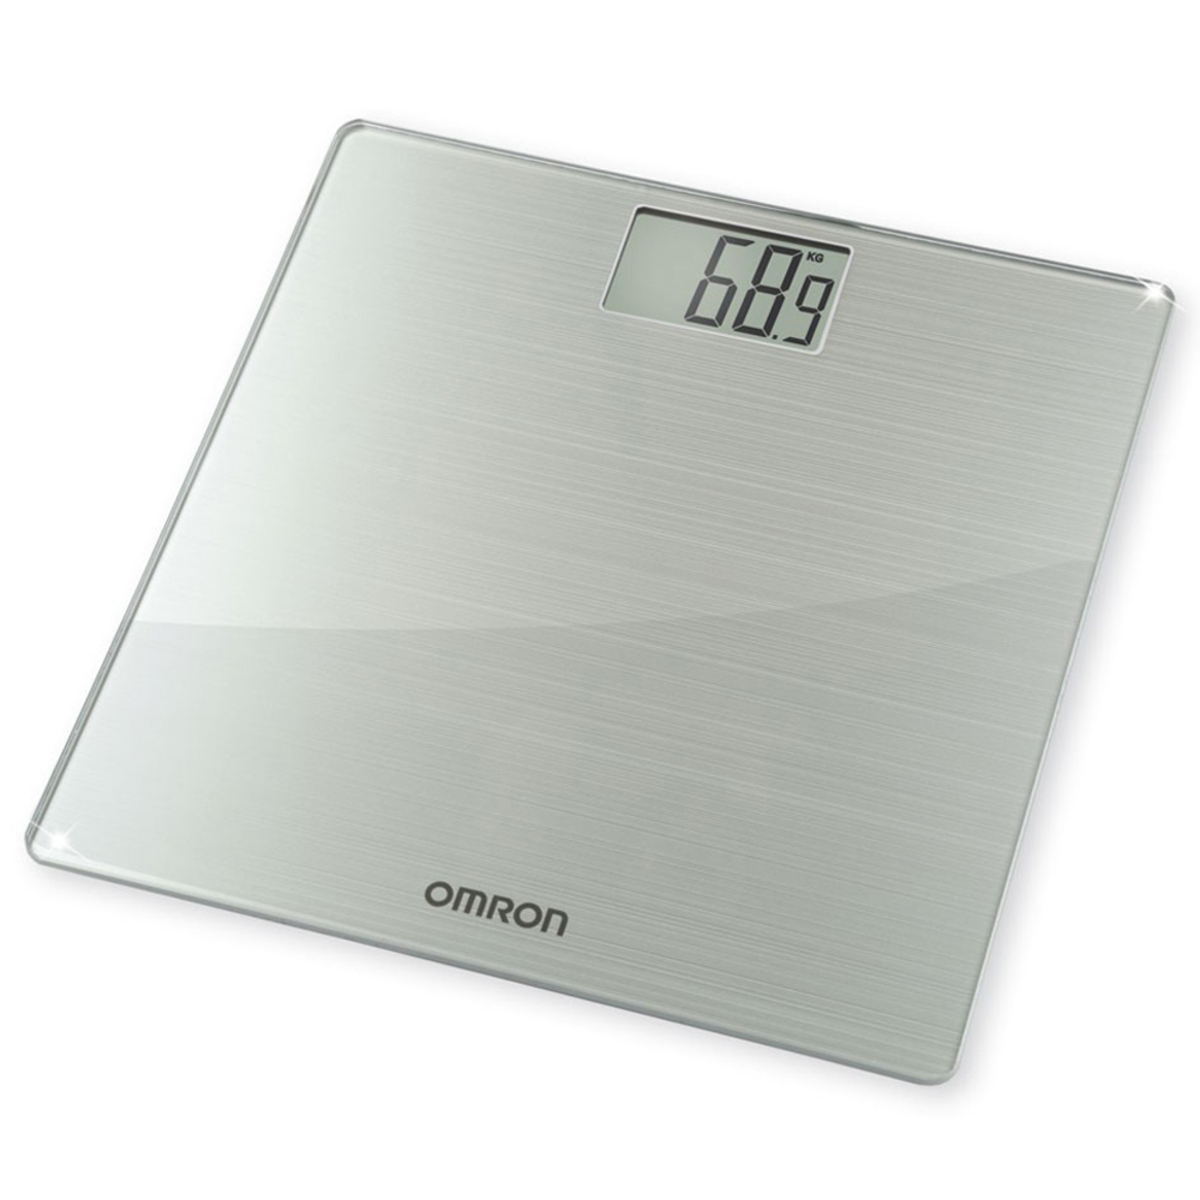 Omron Weighing Scale HN-286